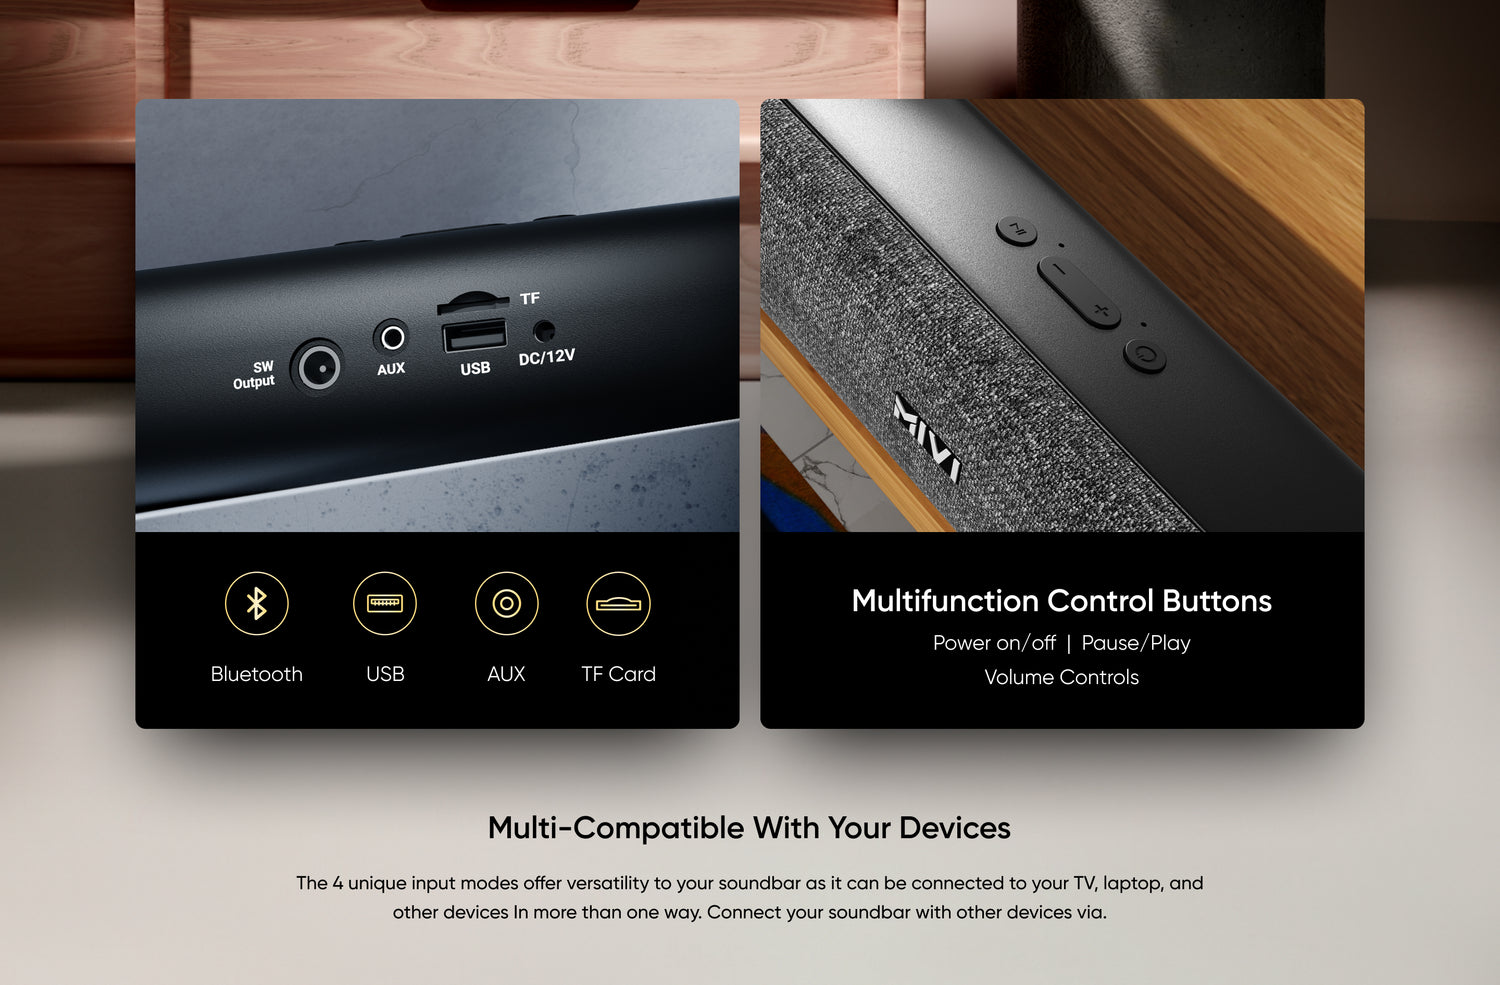 Multifunction Control Buttons - Power on/off  |  Pause/Play Volume Controls , Multi-Compatible with Your Devices - The 4 unique input modes offer versatility to your soundbar as it can be connected to your TV, laptop, and other devices In more than one way. Connect your soundbar with other devices via.